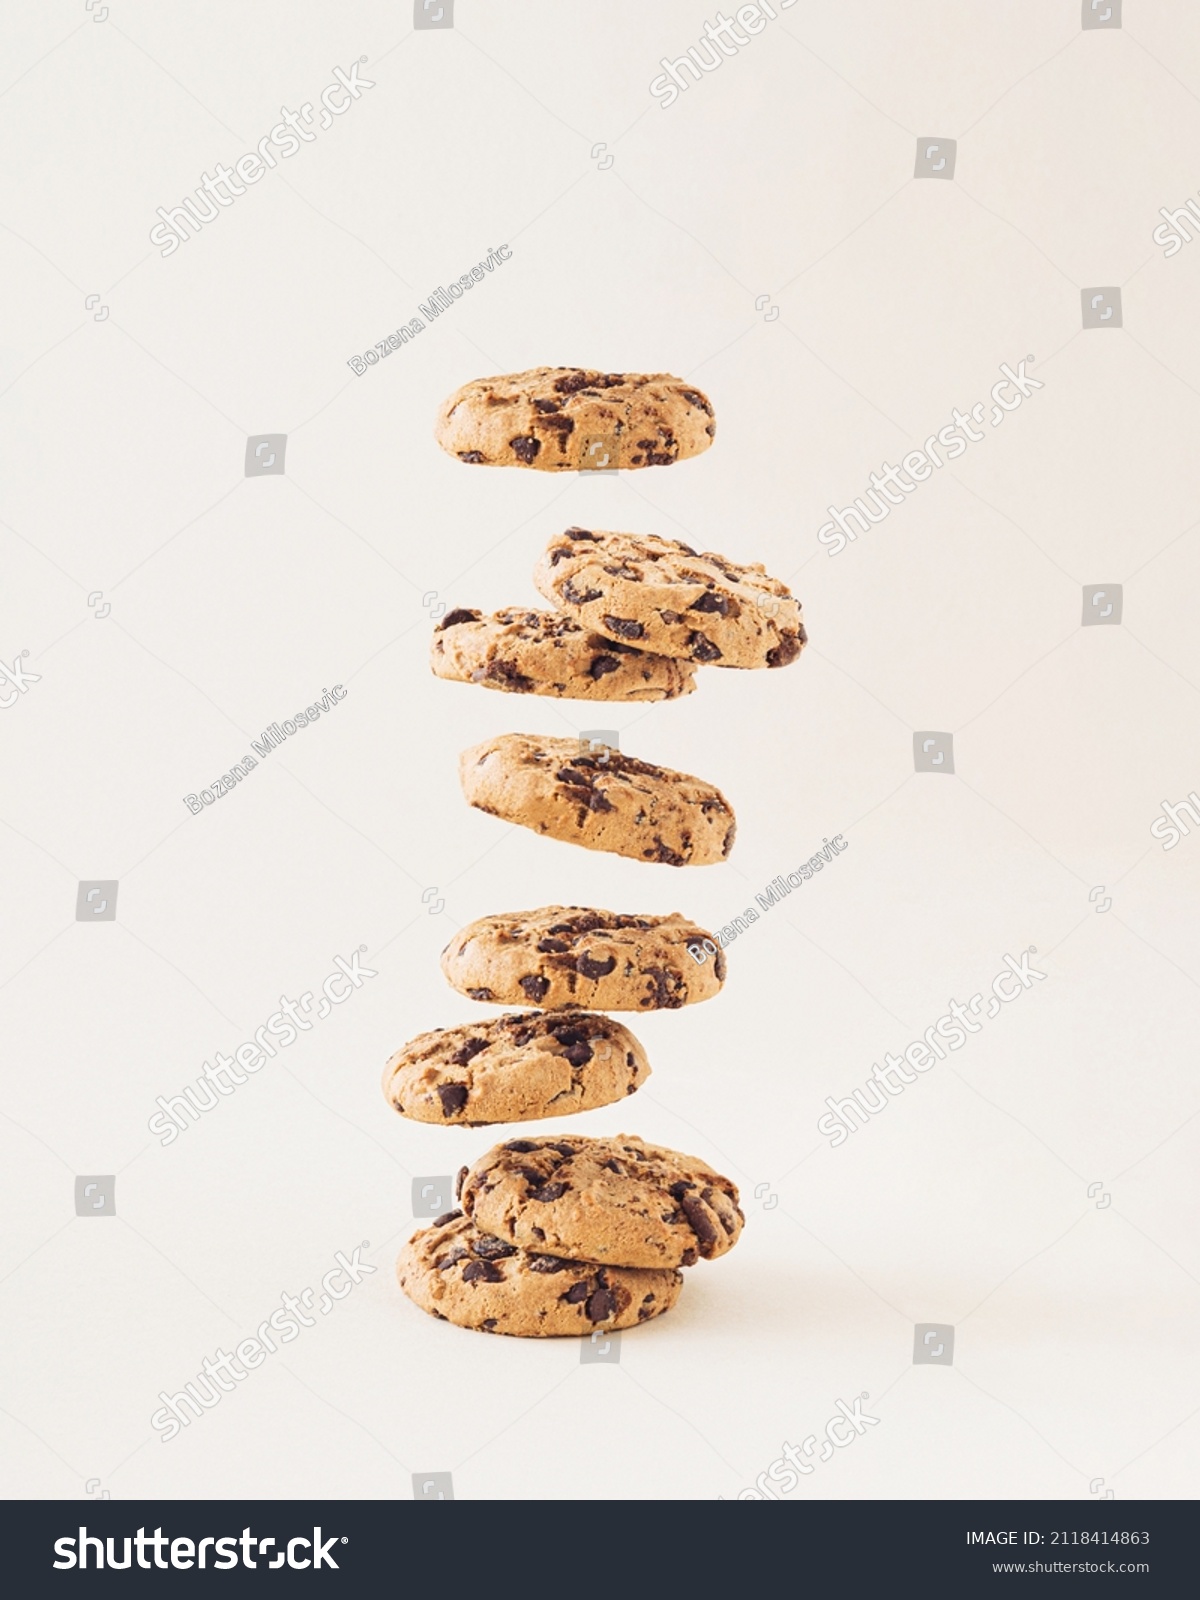 Chocolate chip cookies on the cream background. Sweet food biscuit concept. #2118414863